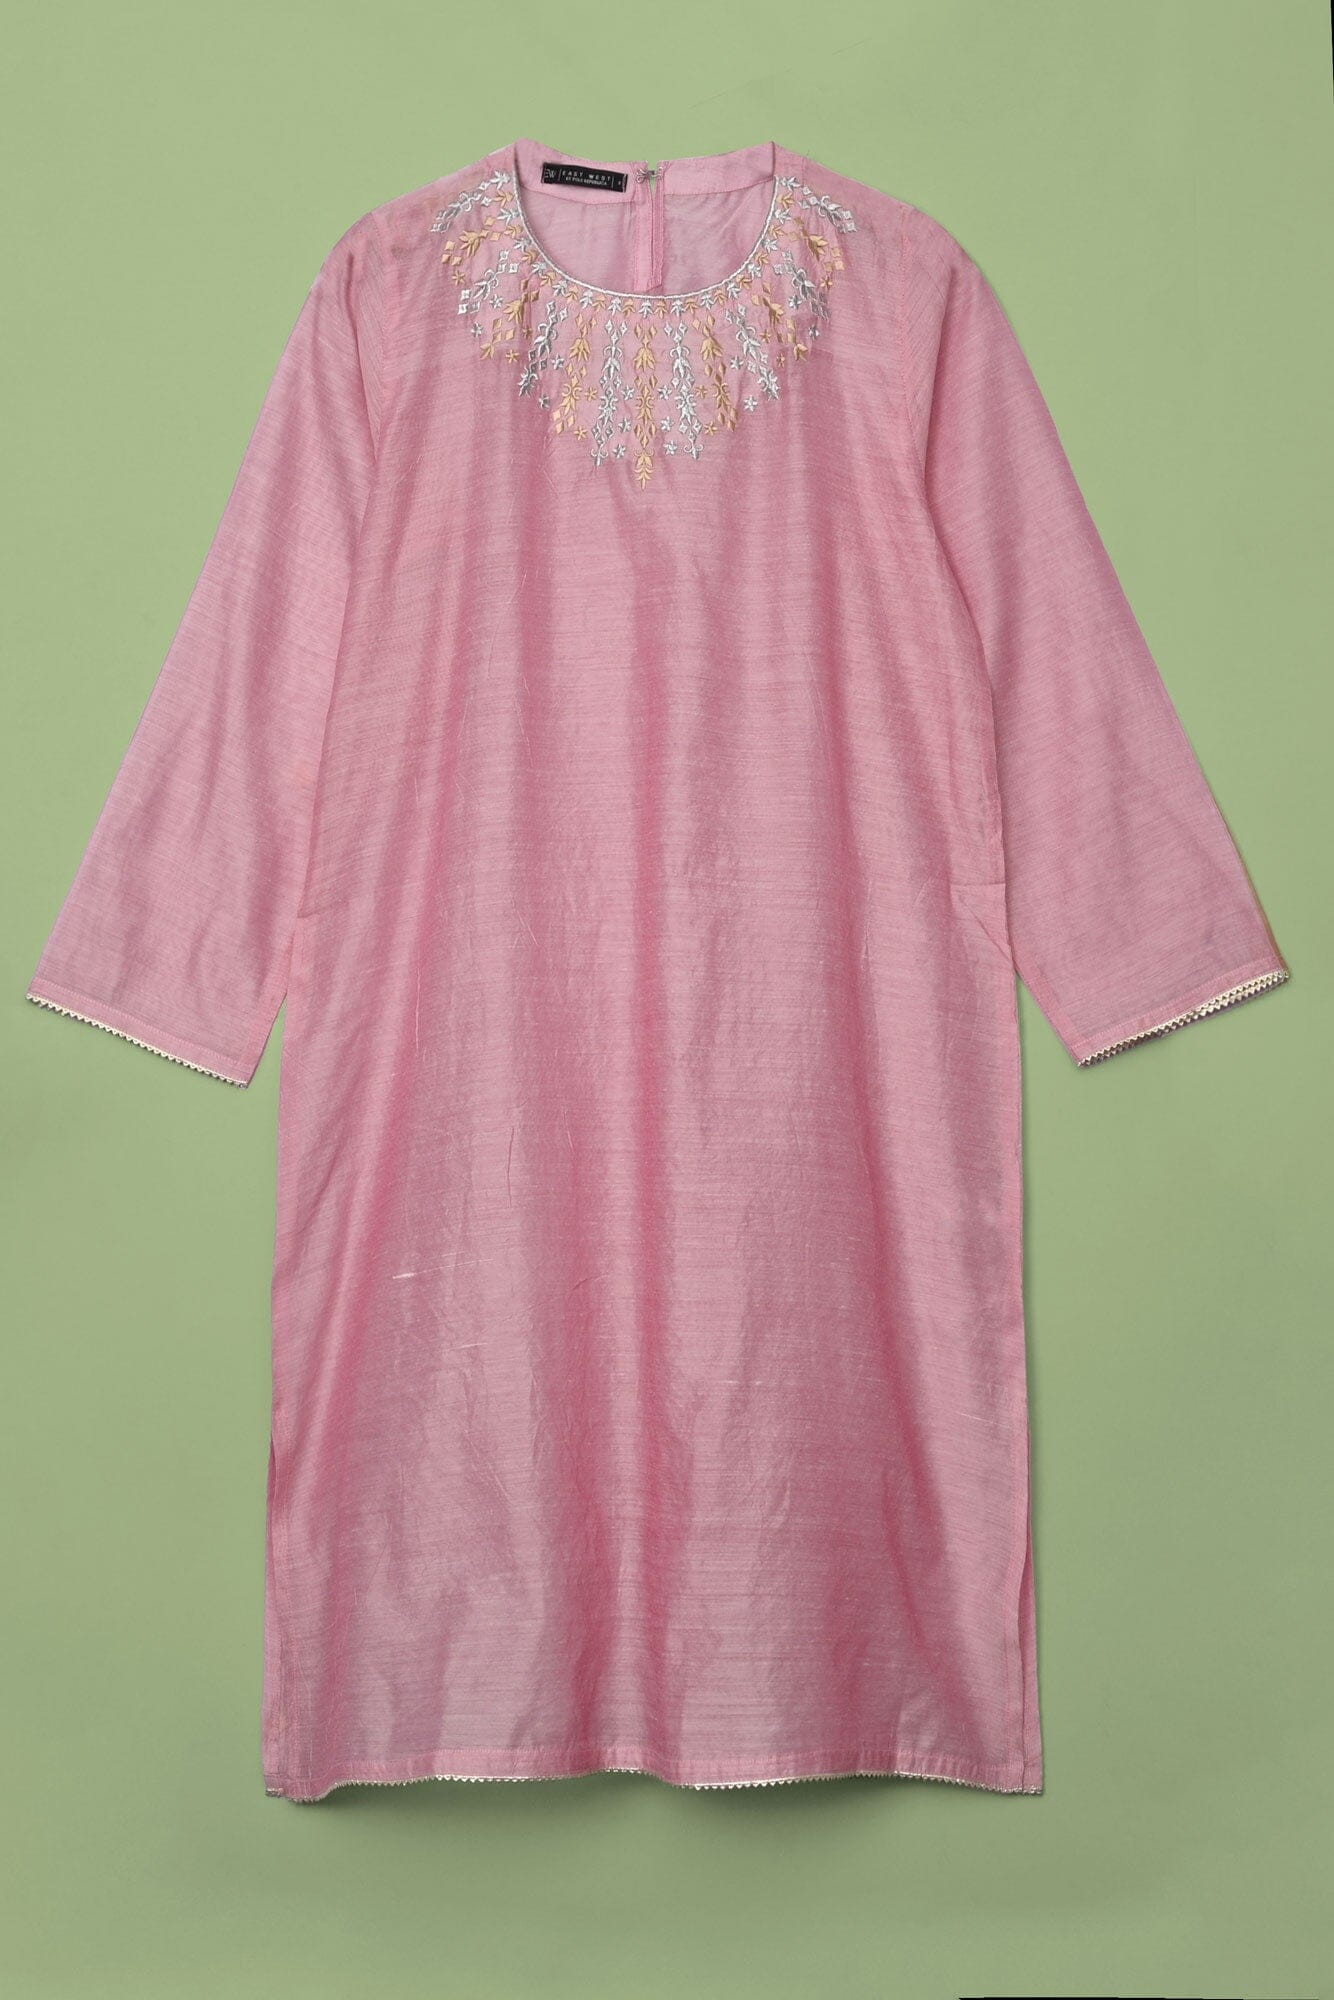 East West By Polo Republica Women’s 2 Pcs Shirt & Dopatta Women's Stitched Suit East West Pink & Gold XS 